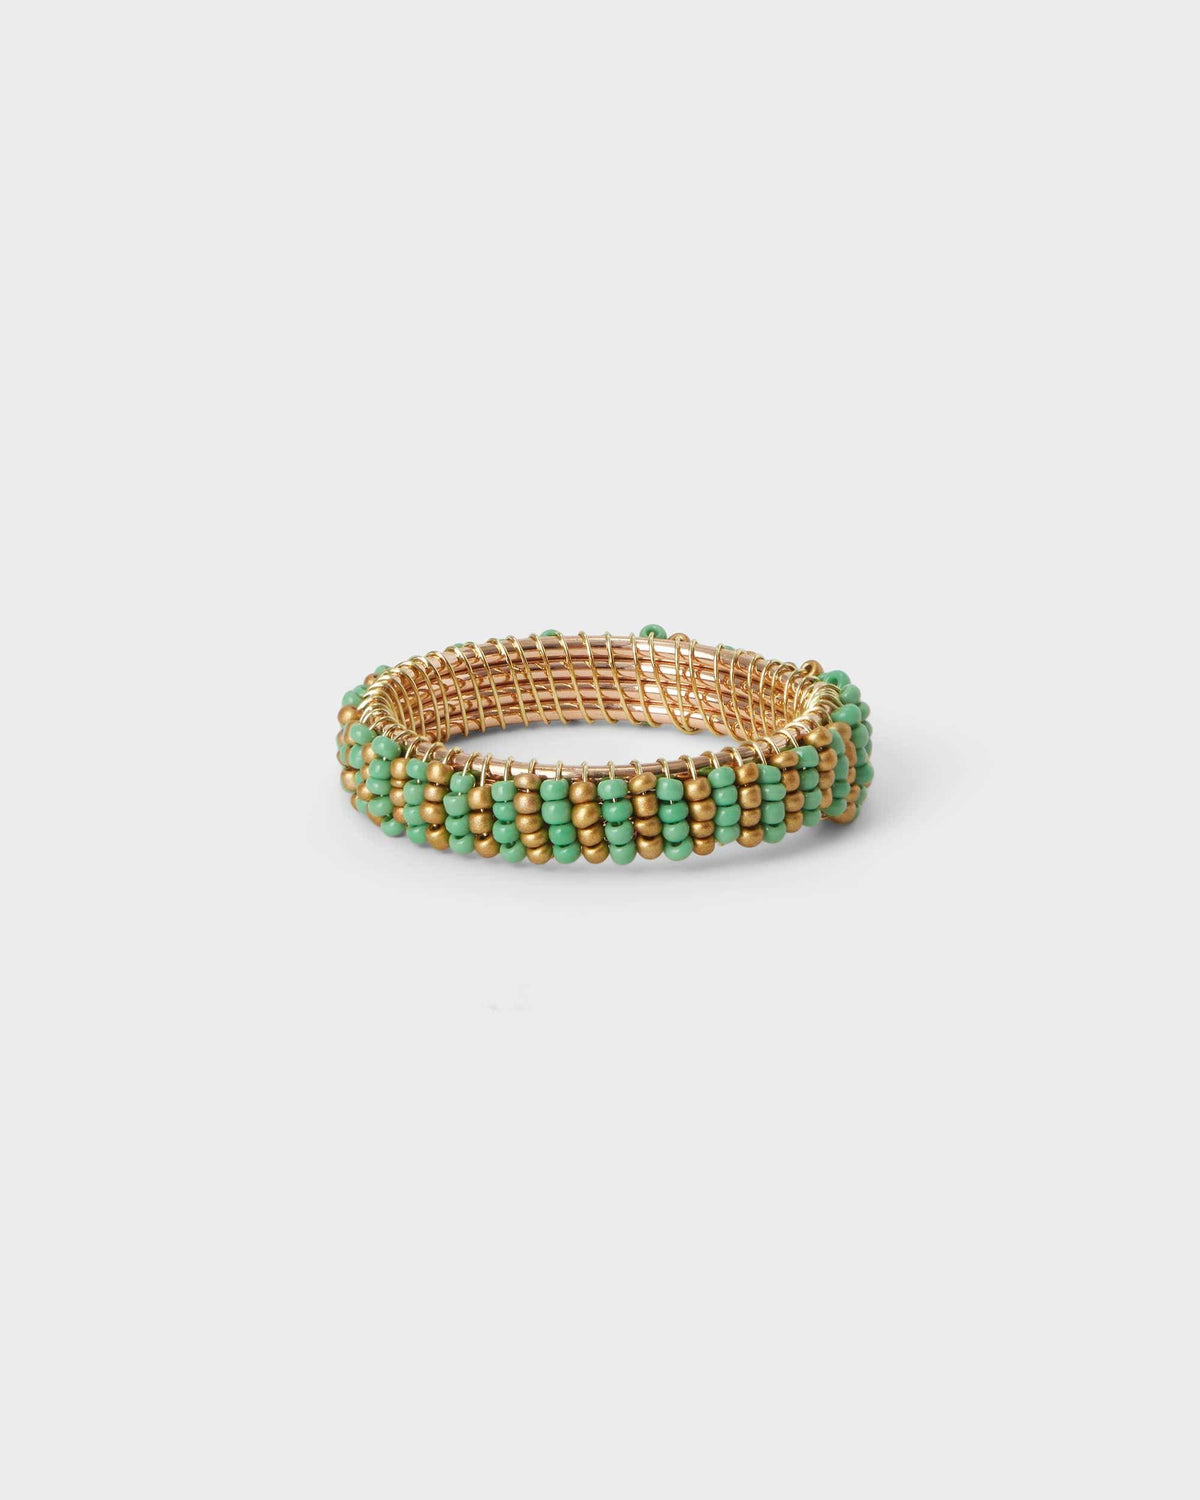 Napkin Ring - Green and Gold beads - Von Home